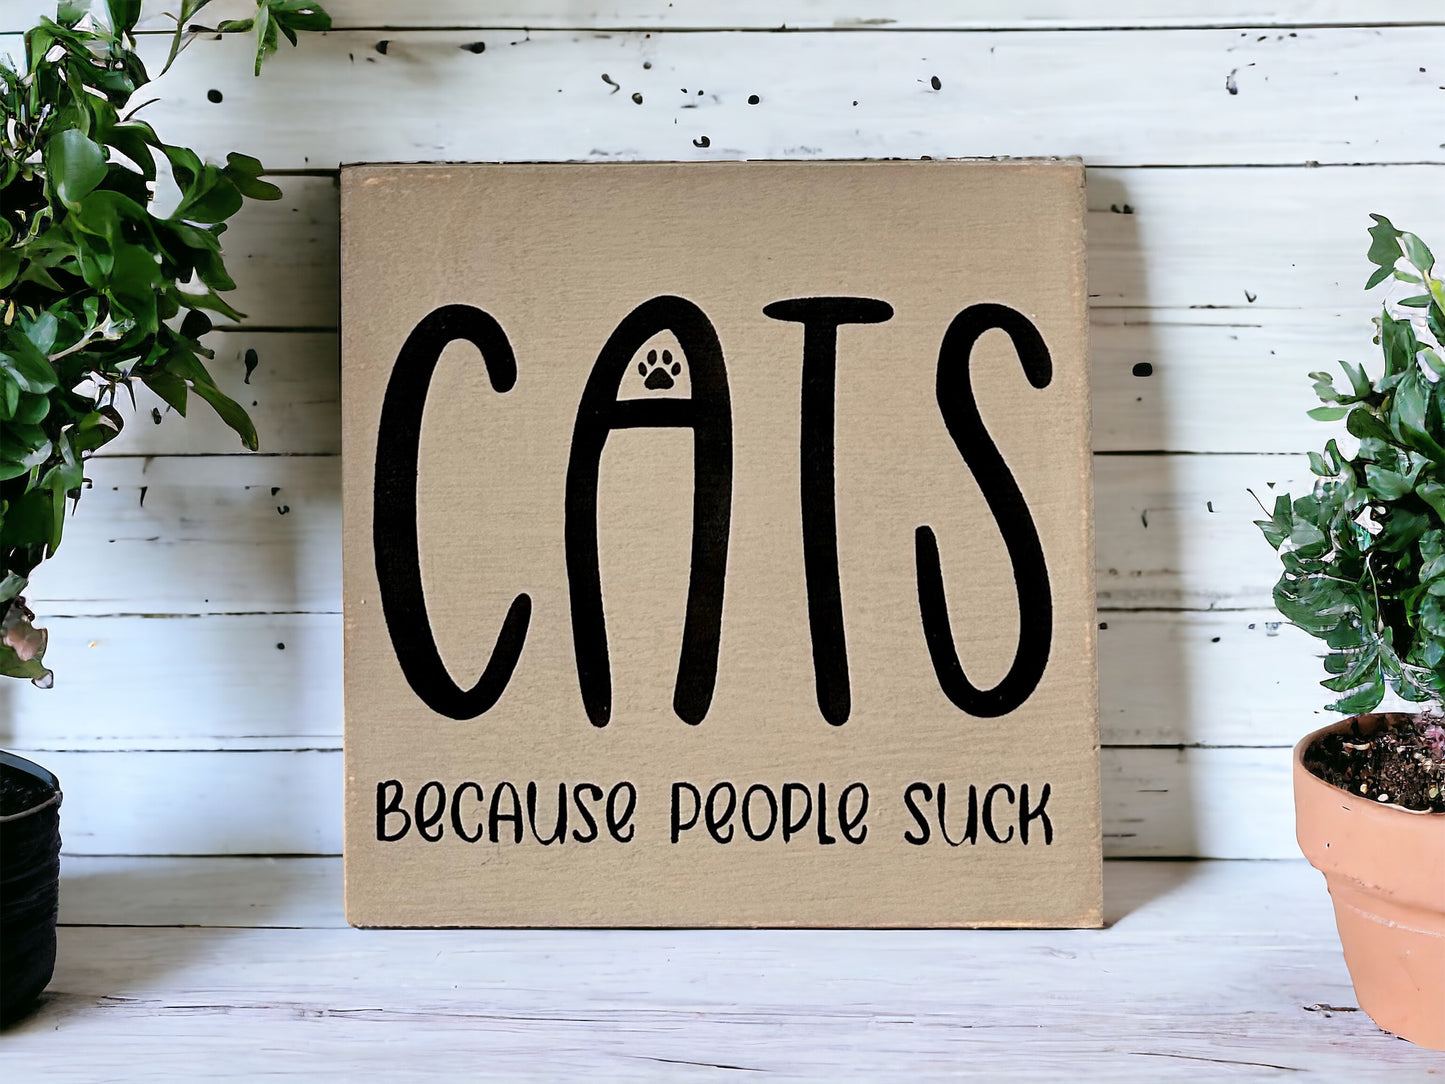 "Cats becasue people suck" wood sign